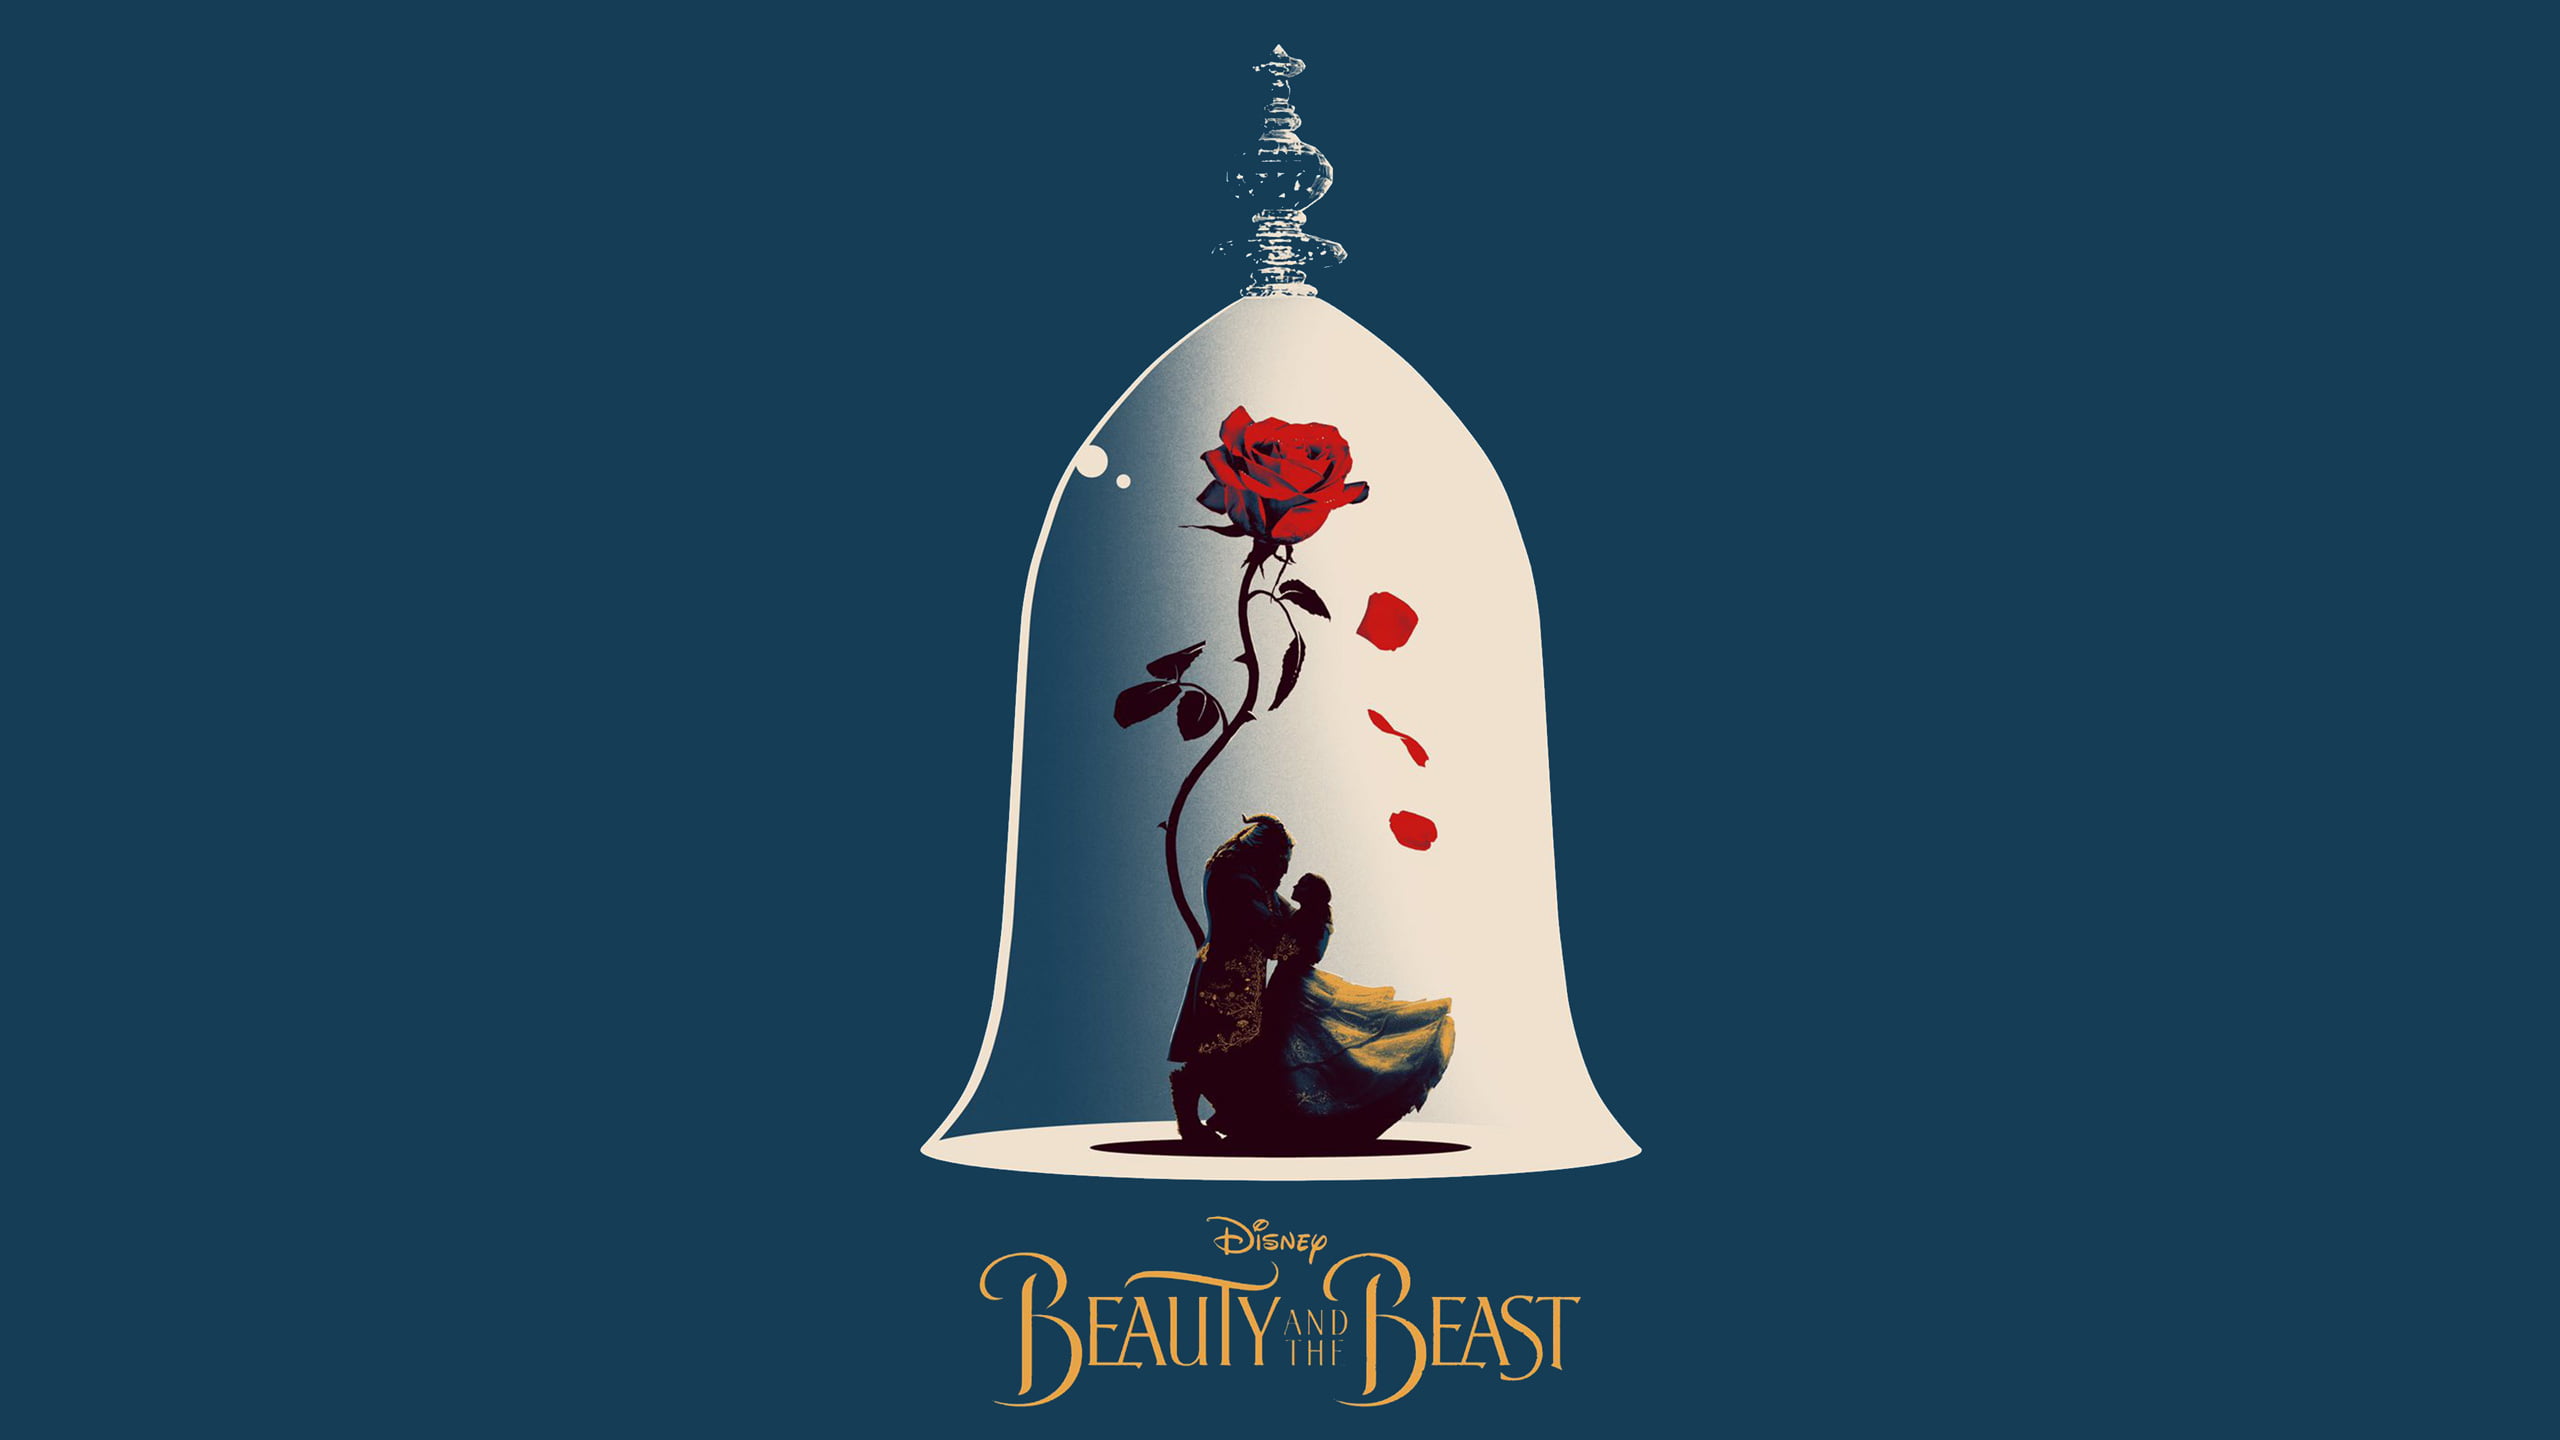 Beauty And The Beast Theater Poster - HD Wallpaper 